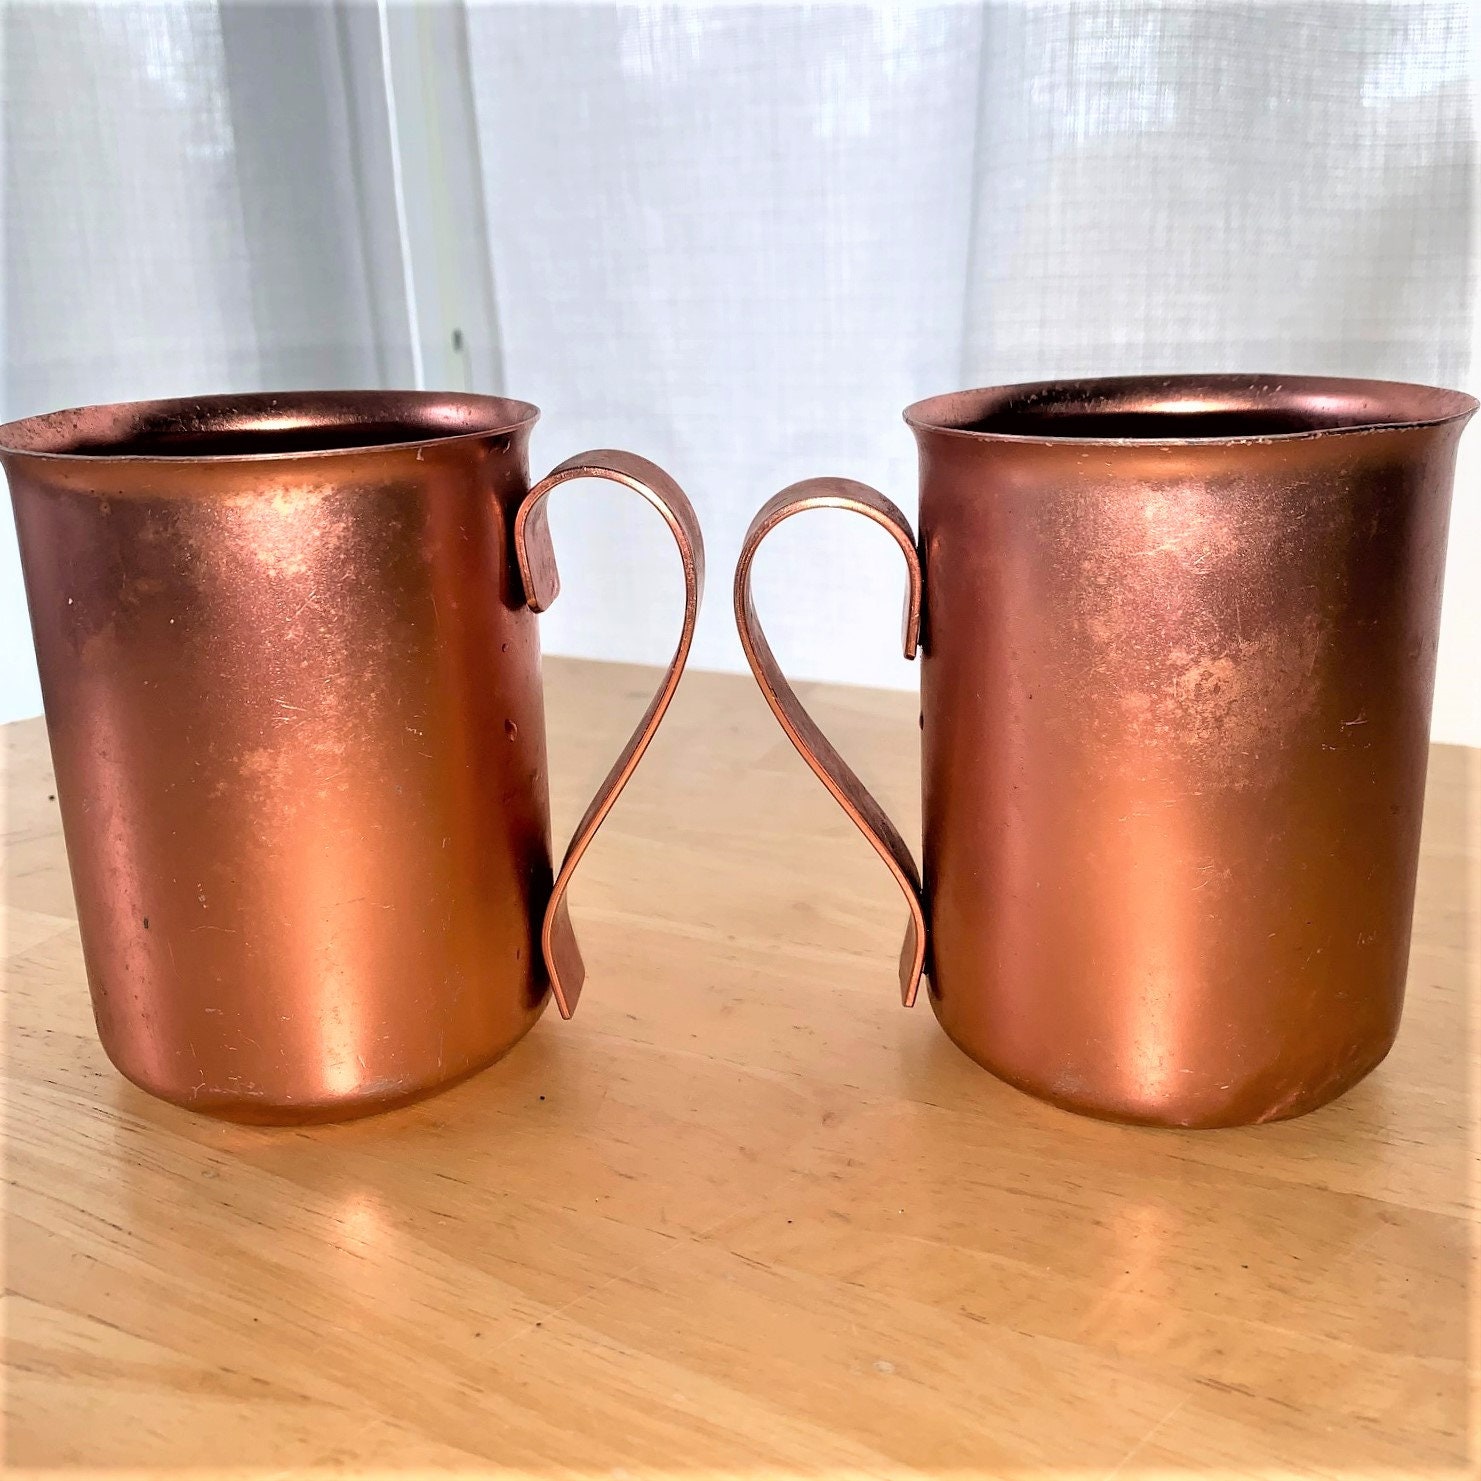 %100 Pure Copper Hand Hammered,Big Size Red Copper Mug, Copper Beer Mug,  Moscow Mule Mug, Office/Boyfriend/Father Gift, Bar Drinkware